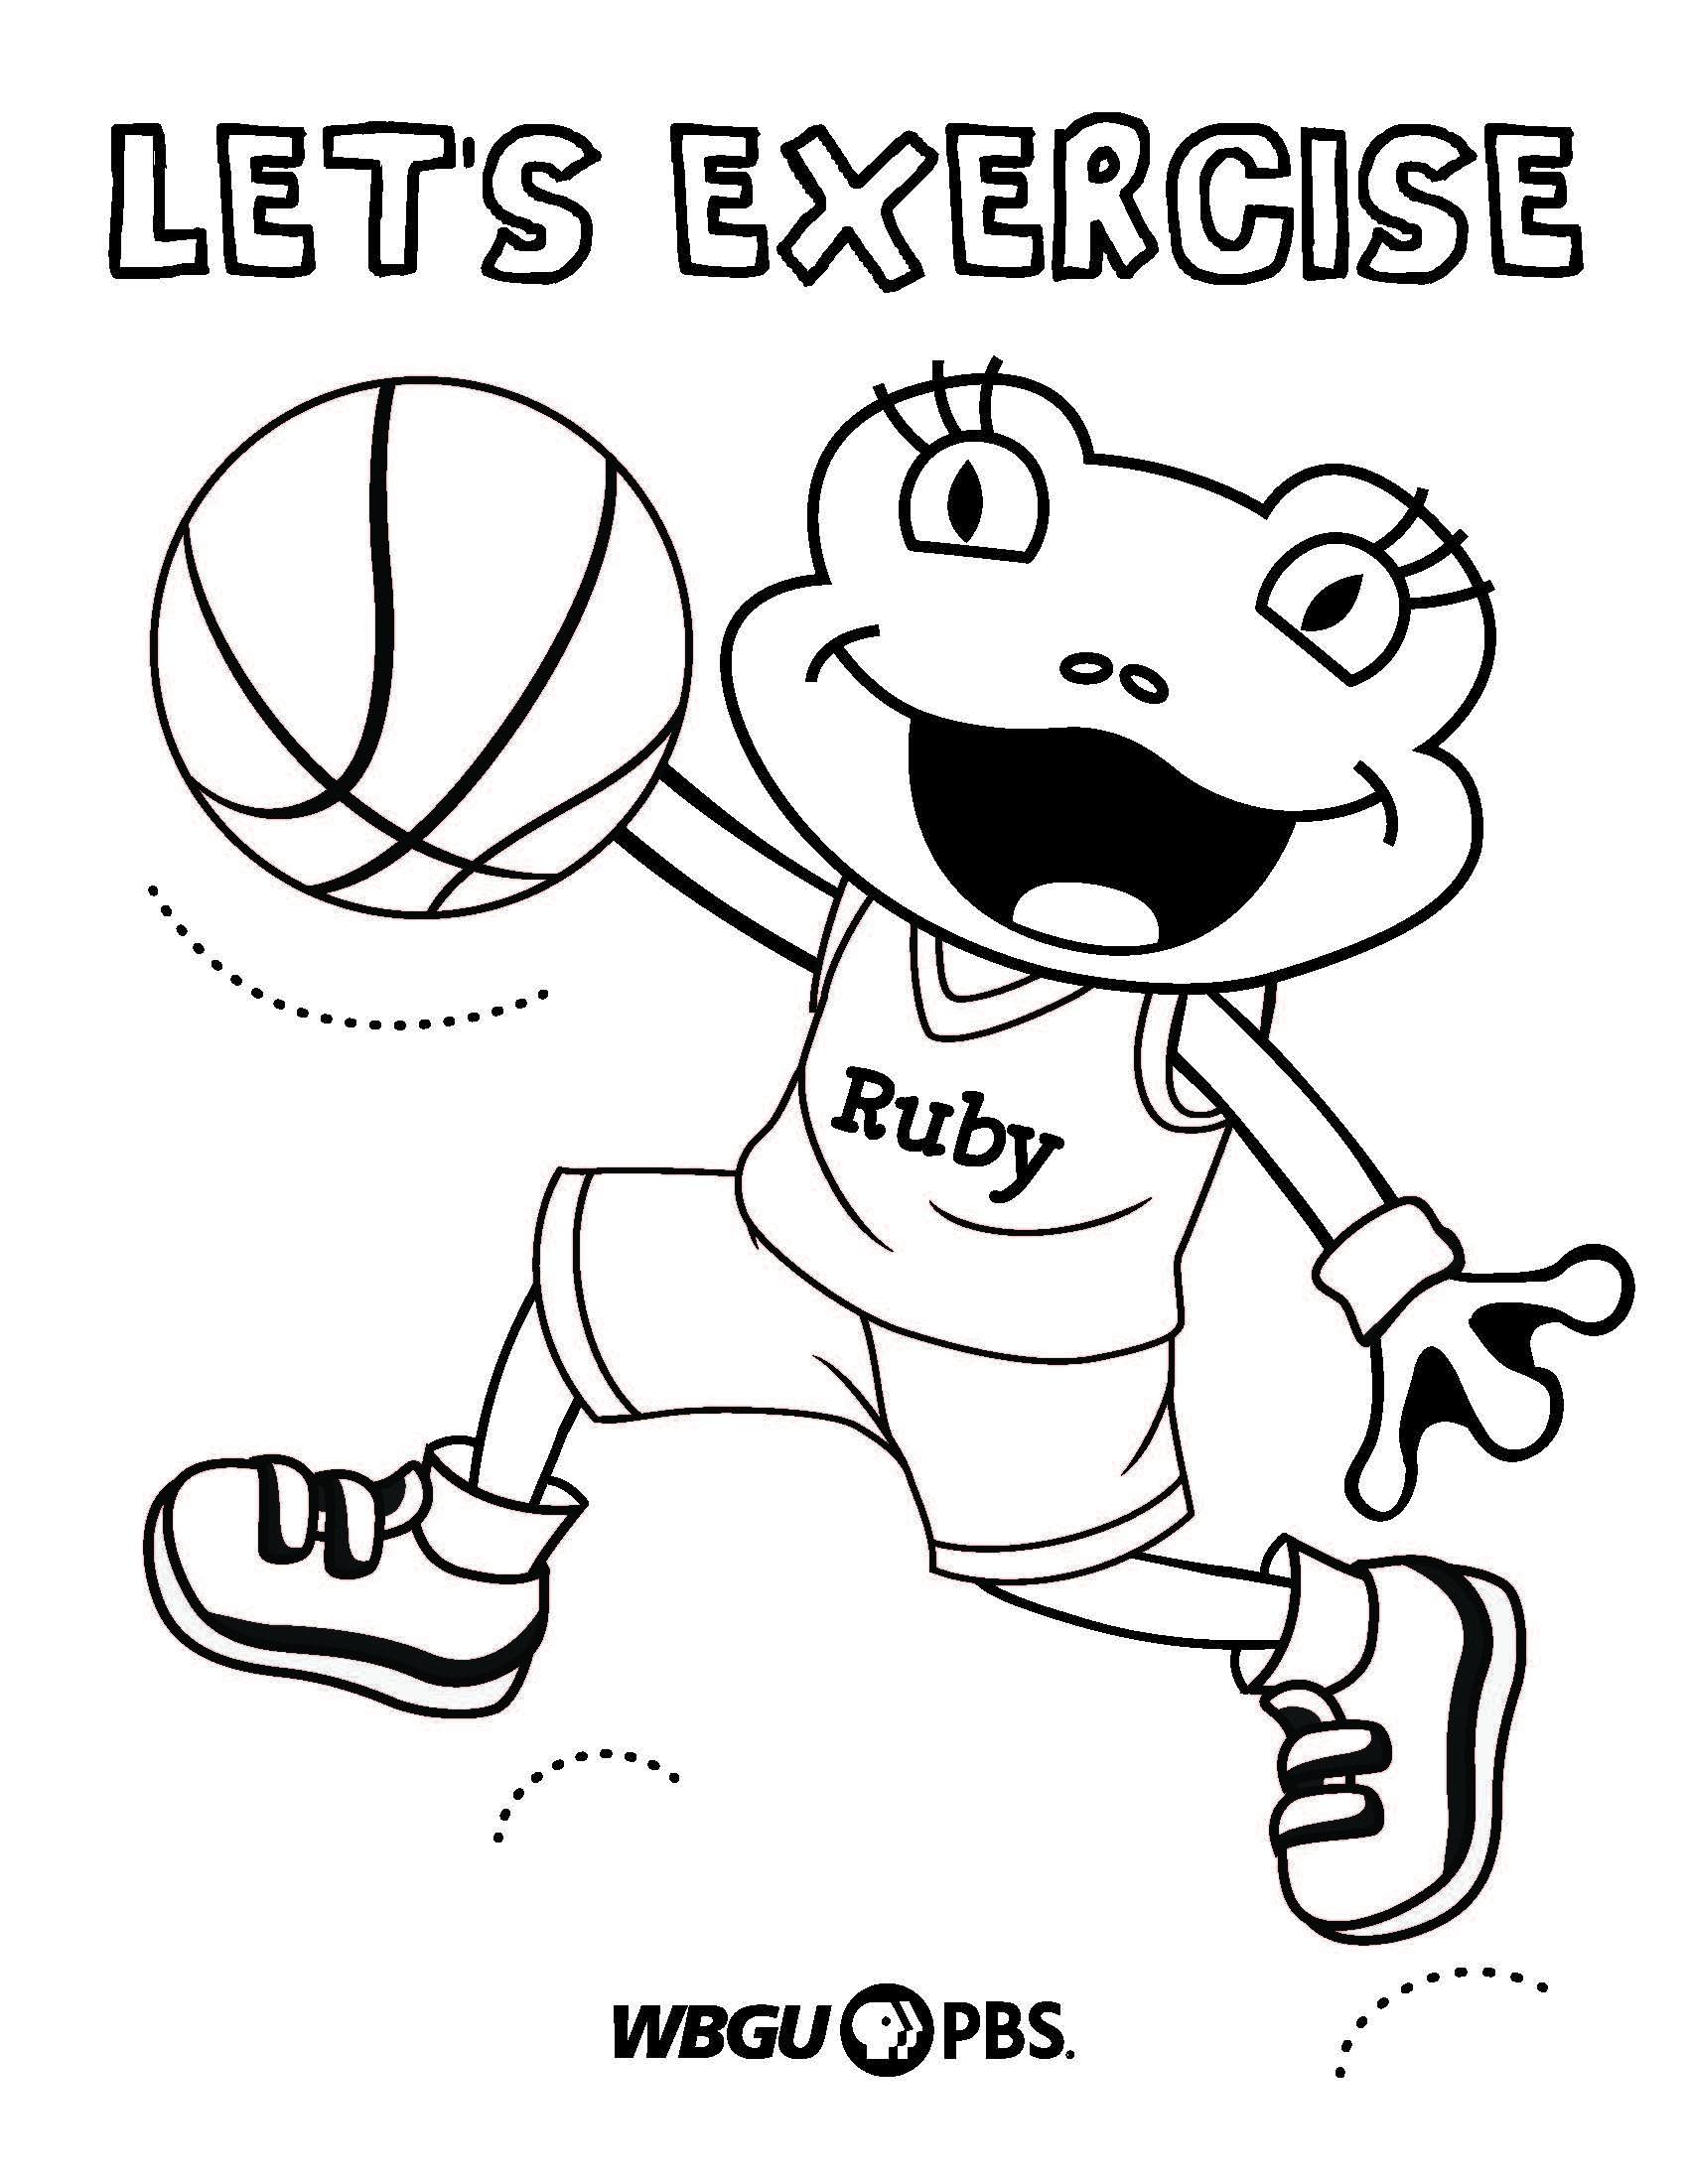 Let's Exercise PDF downloadable printout for coloring-exercise